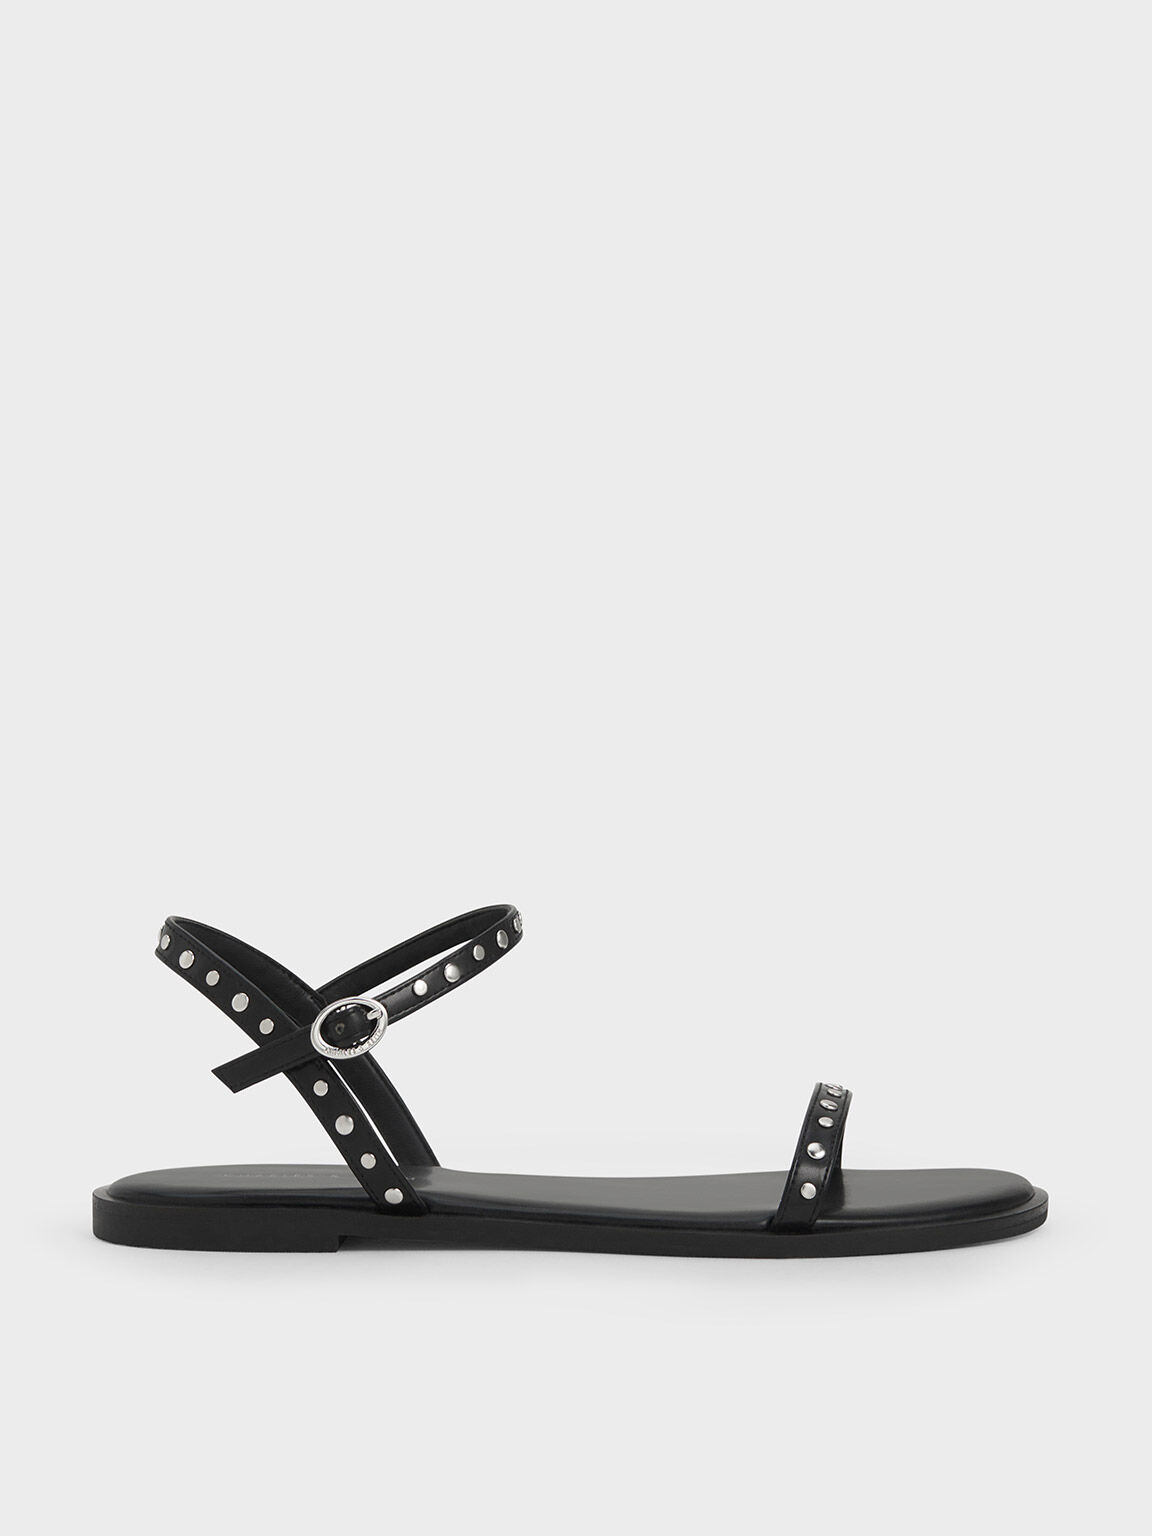 Wedge Sandals for Women | Shoe Carnival